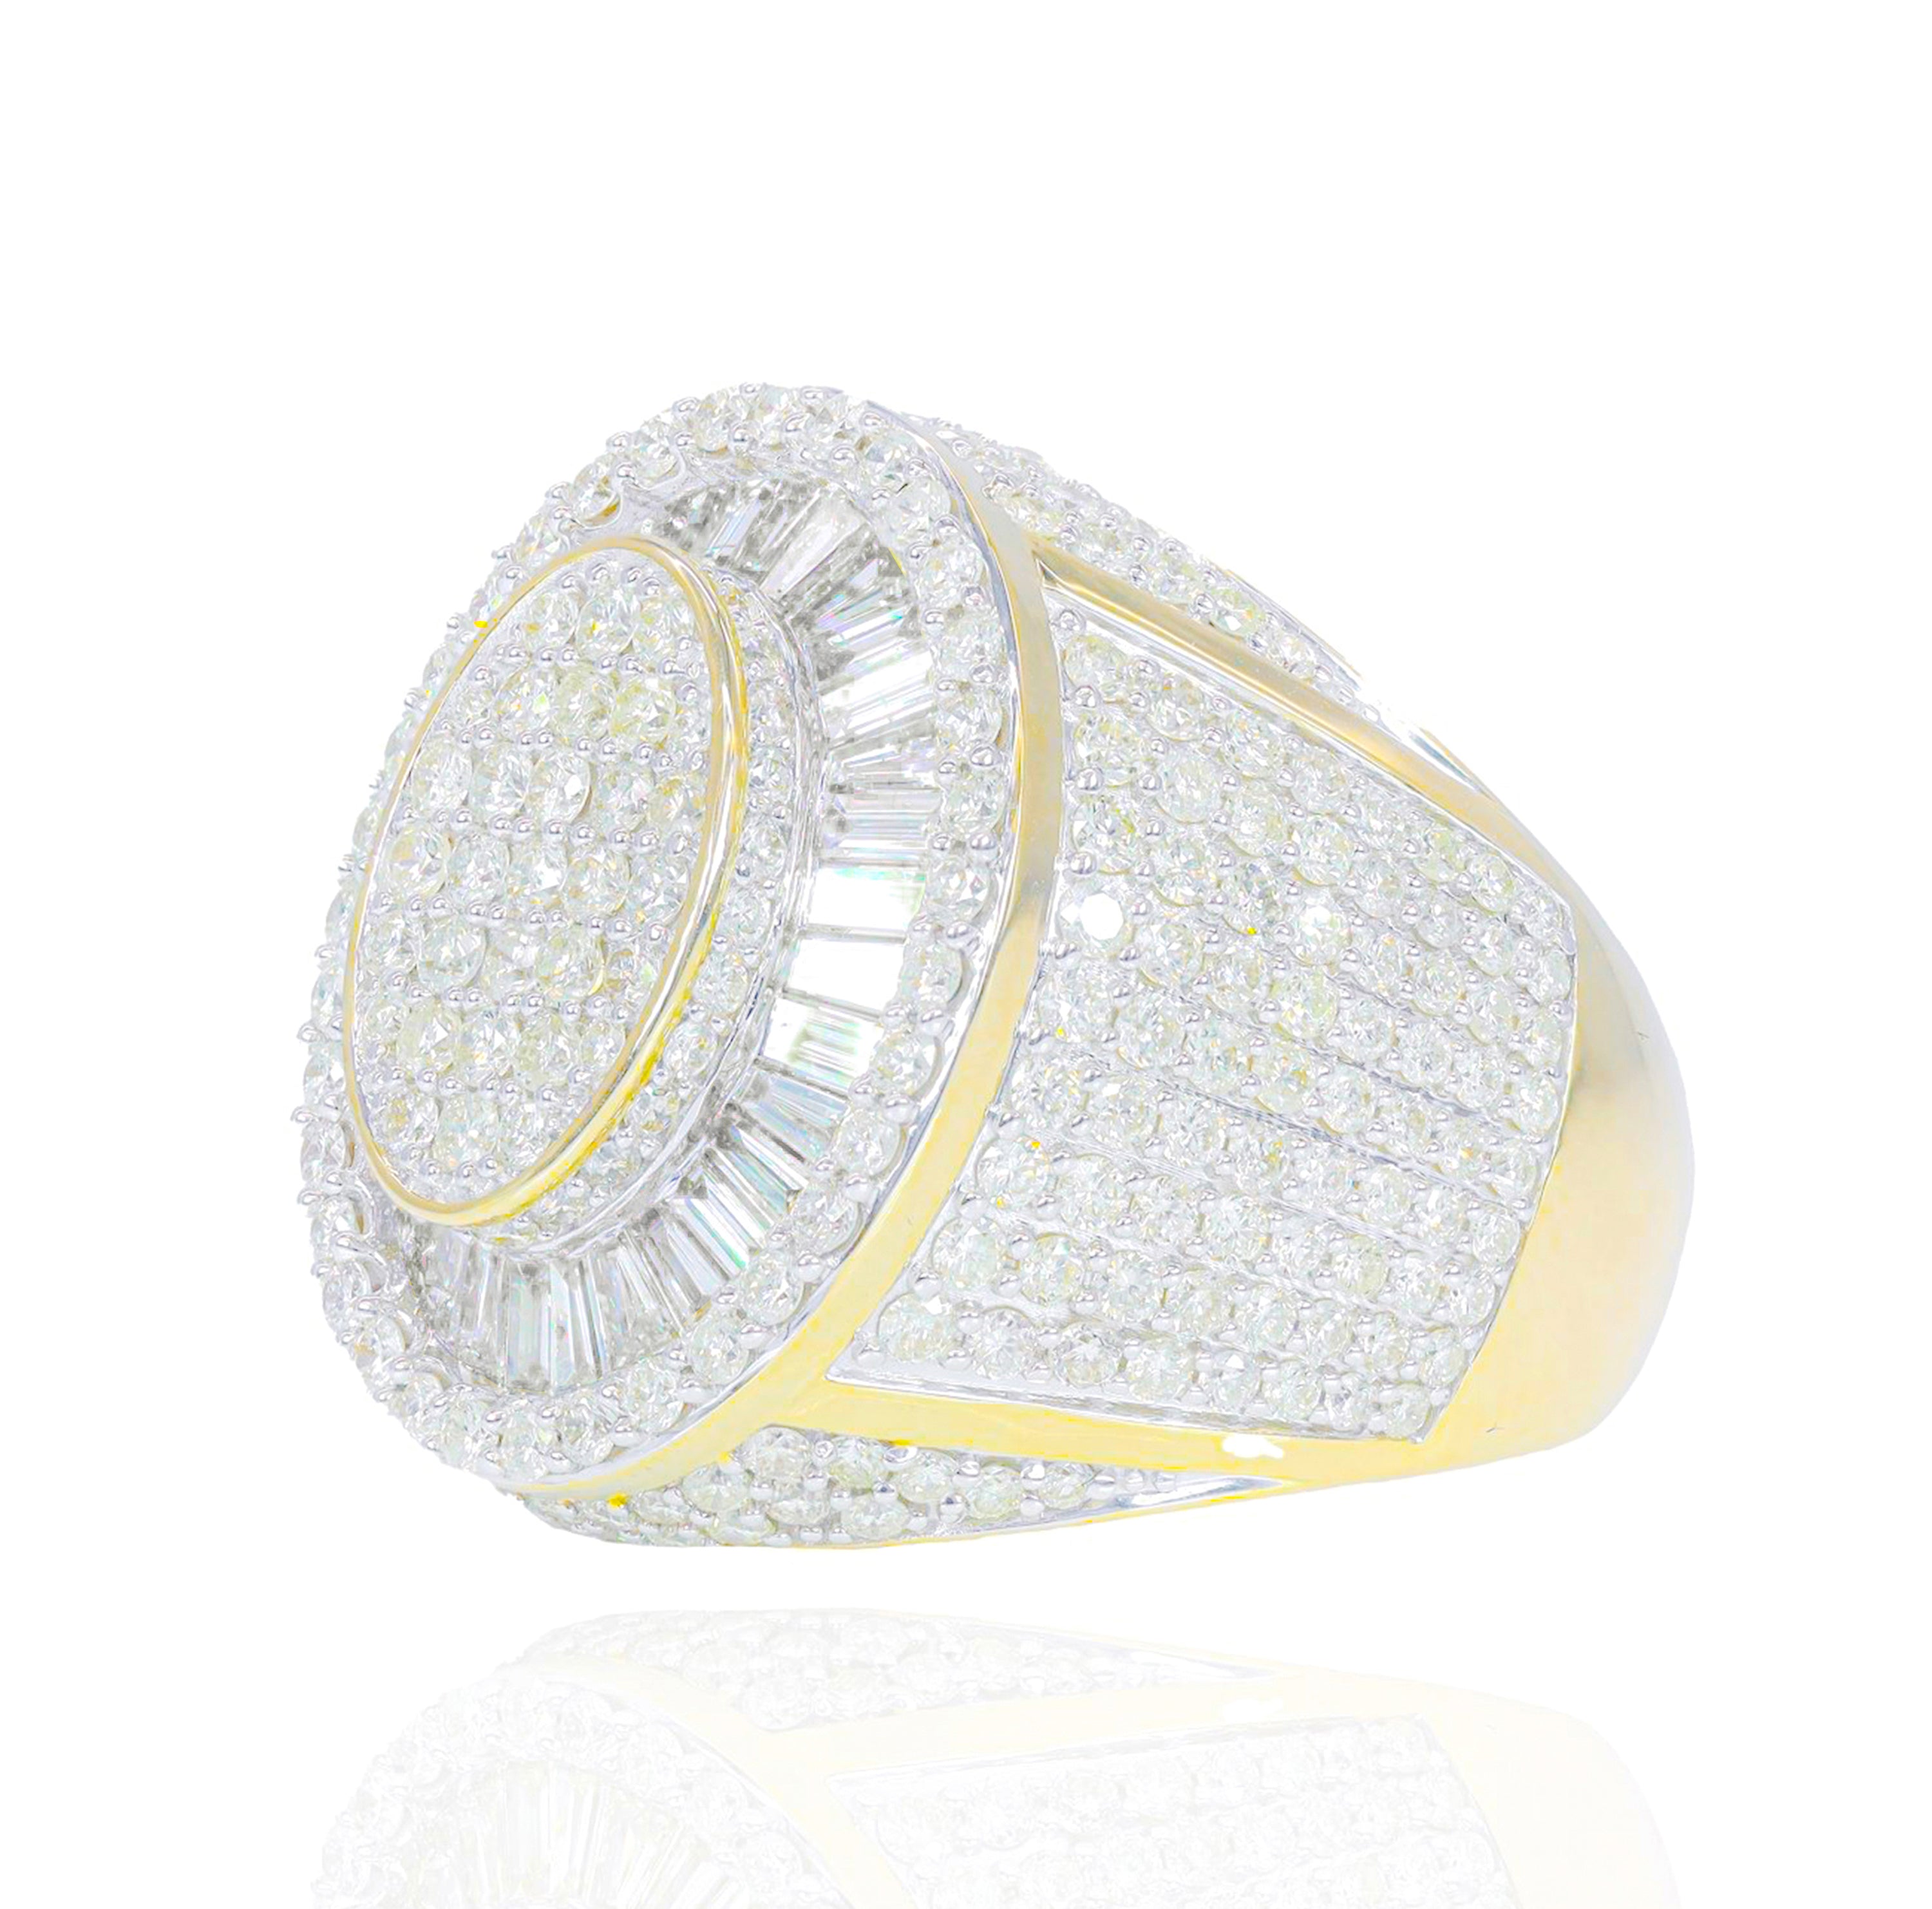 Baguette & White Round Diamond Oval Shaped Ring